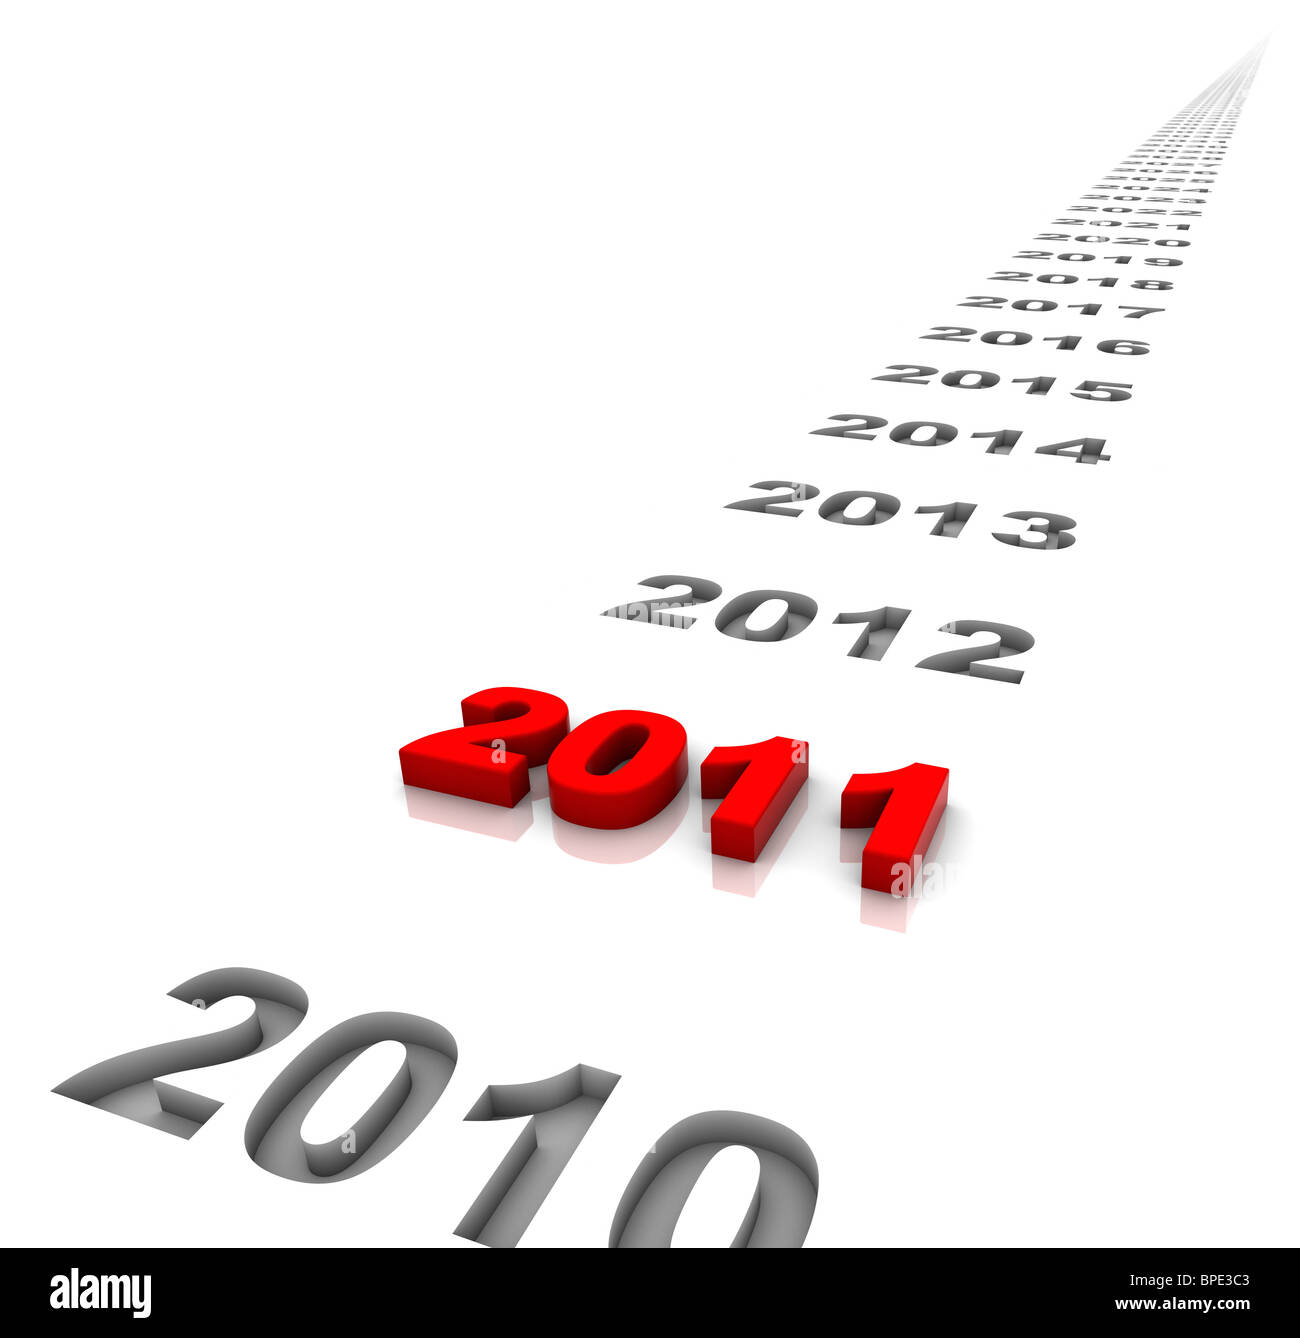 New year 2011 and the years ahead. Part of a series. Stock Photo